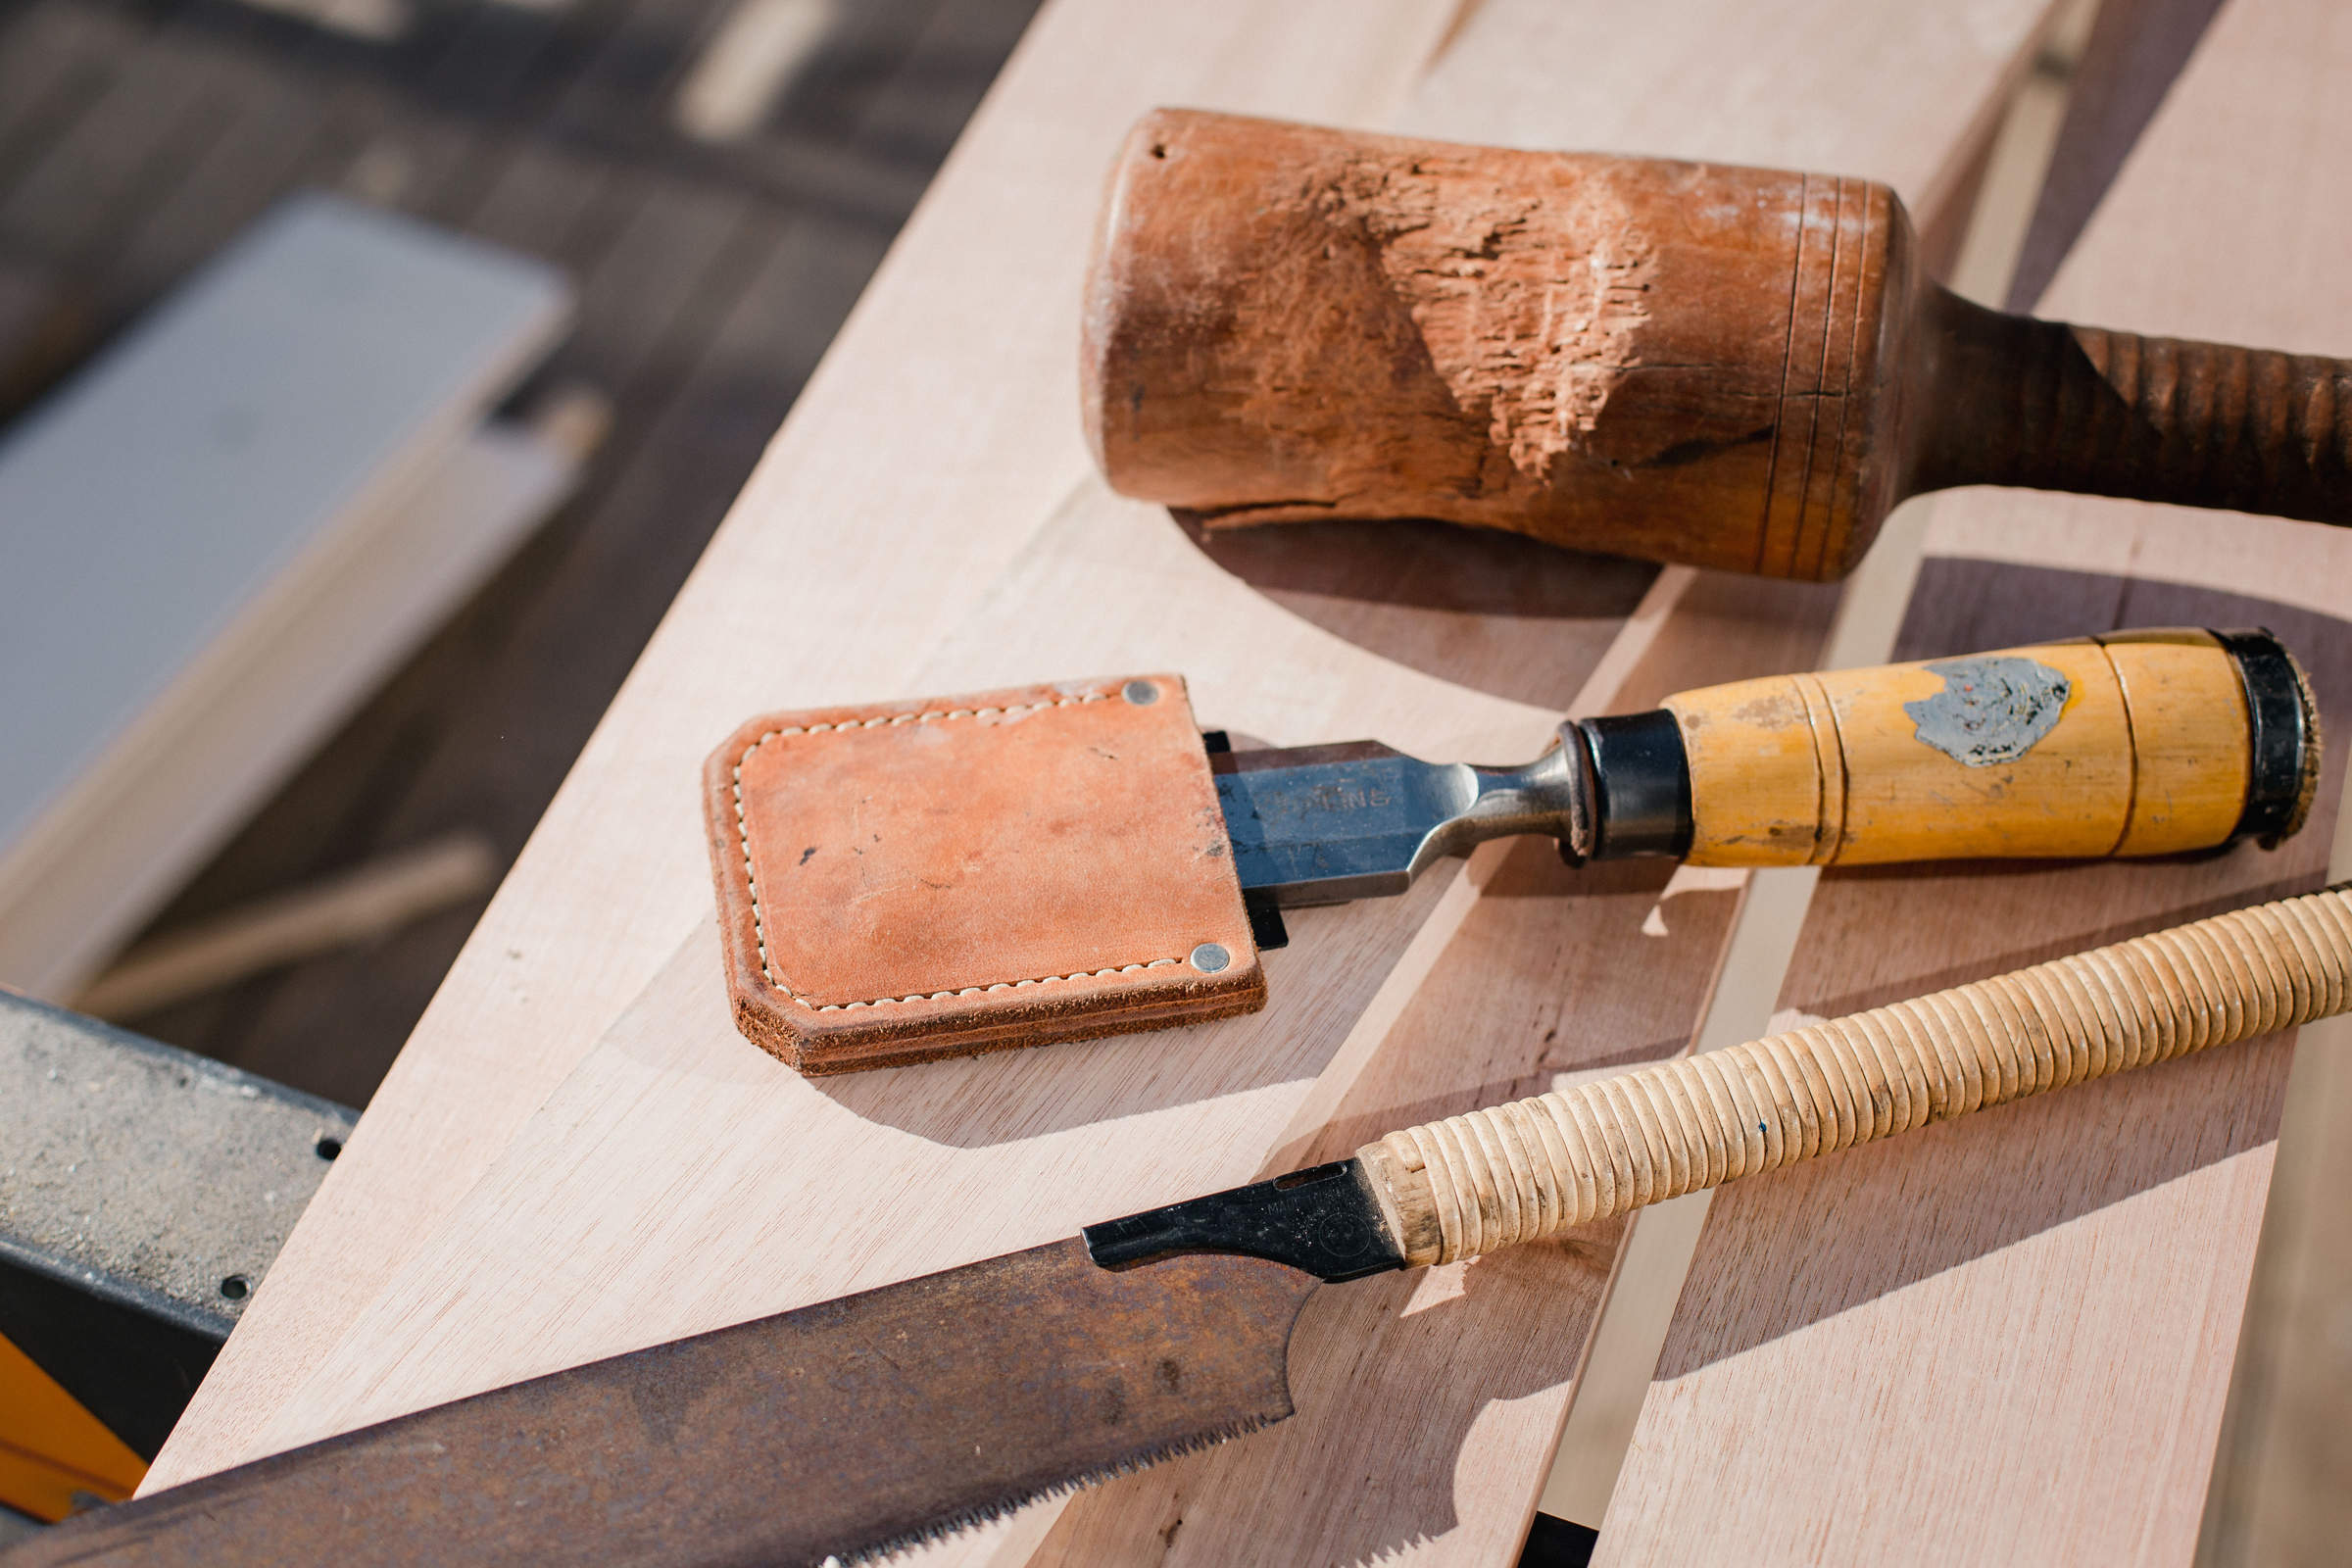 A variety of specialised hand tools to create a high quality and custom finish including Japanese saws, chisels and mallets. This helps create an accurate and professional handcrafted timber finish. Photo: Jordan Davis.